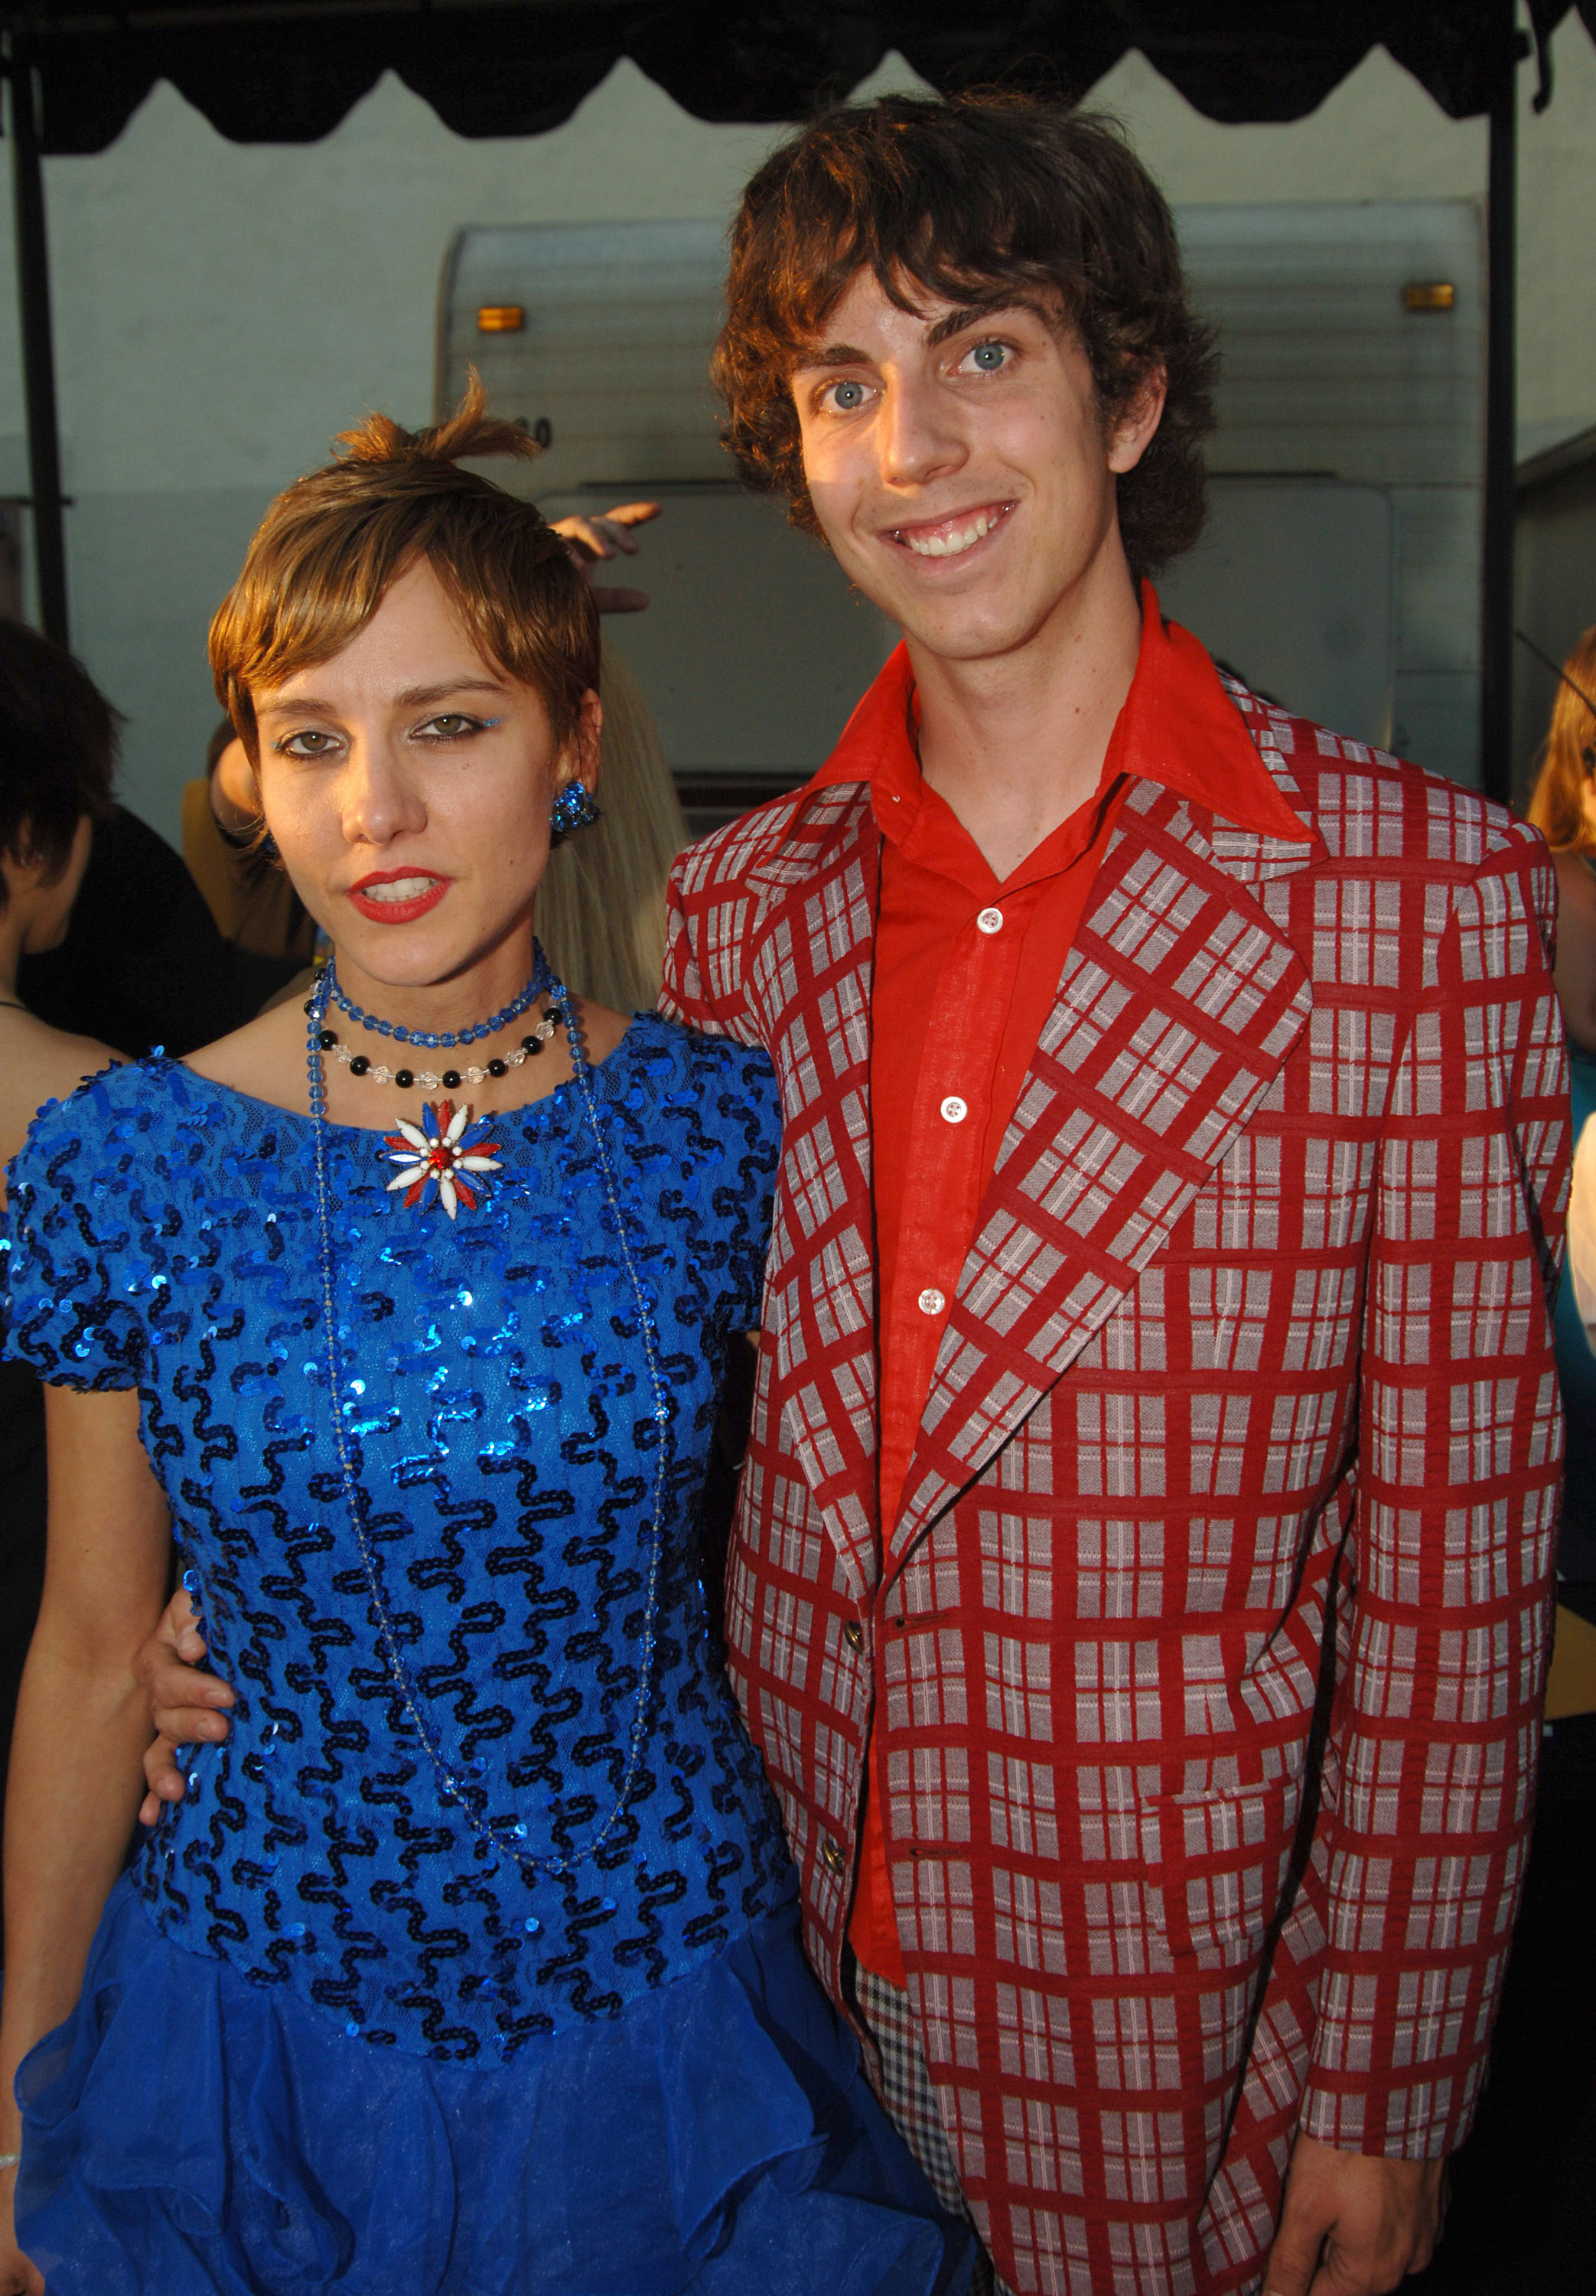 Two people posing; one in a blue sequined dress with an oversized bow, the other in a red checkered suit jacket